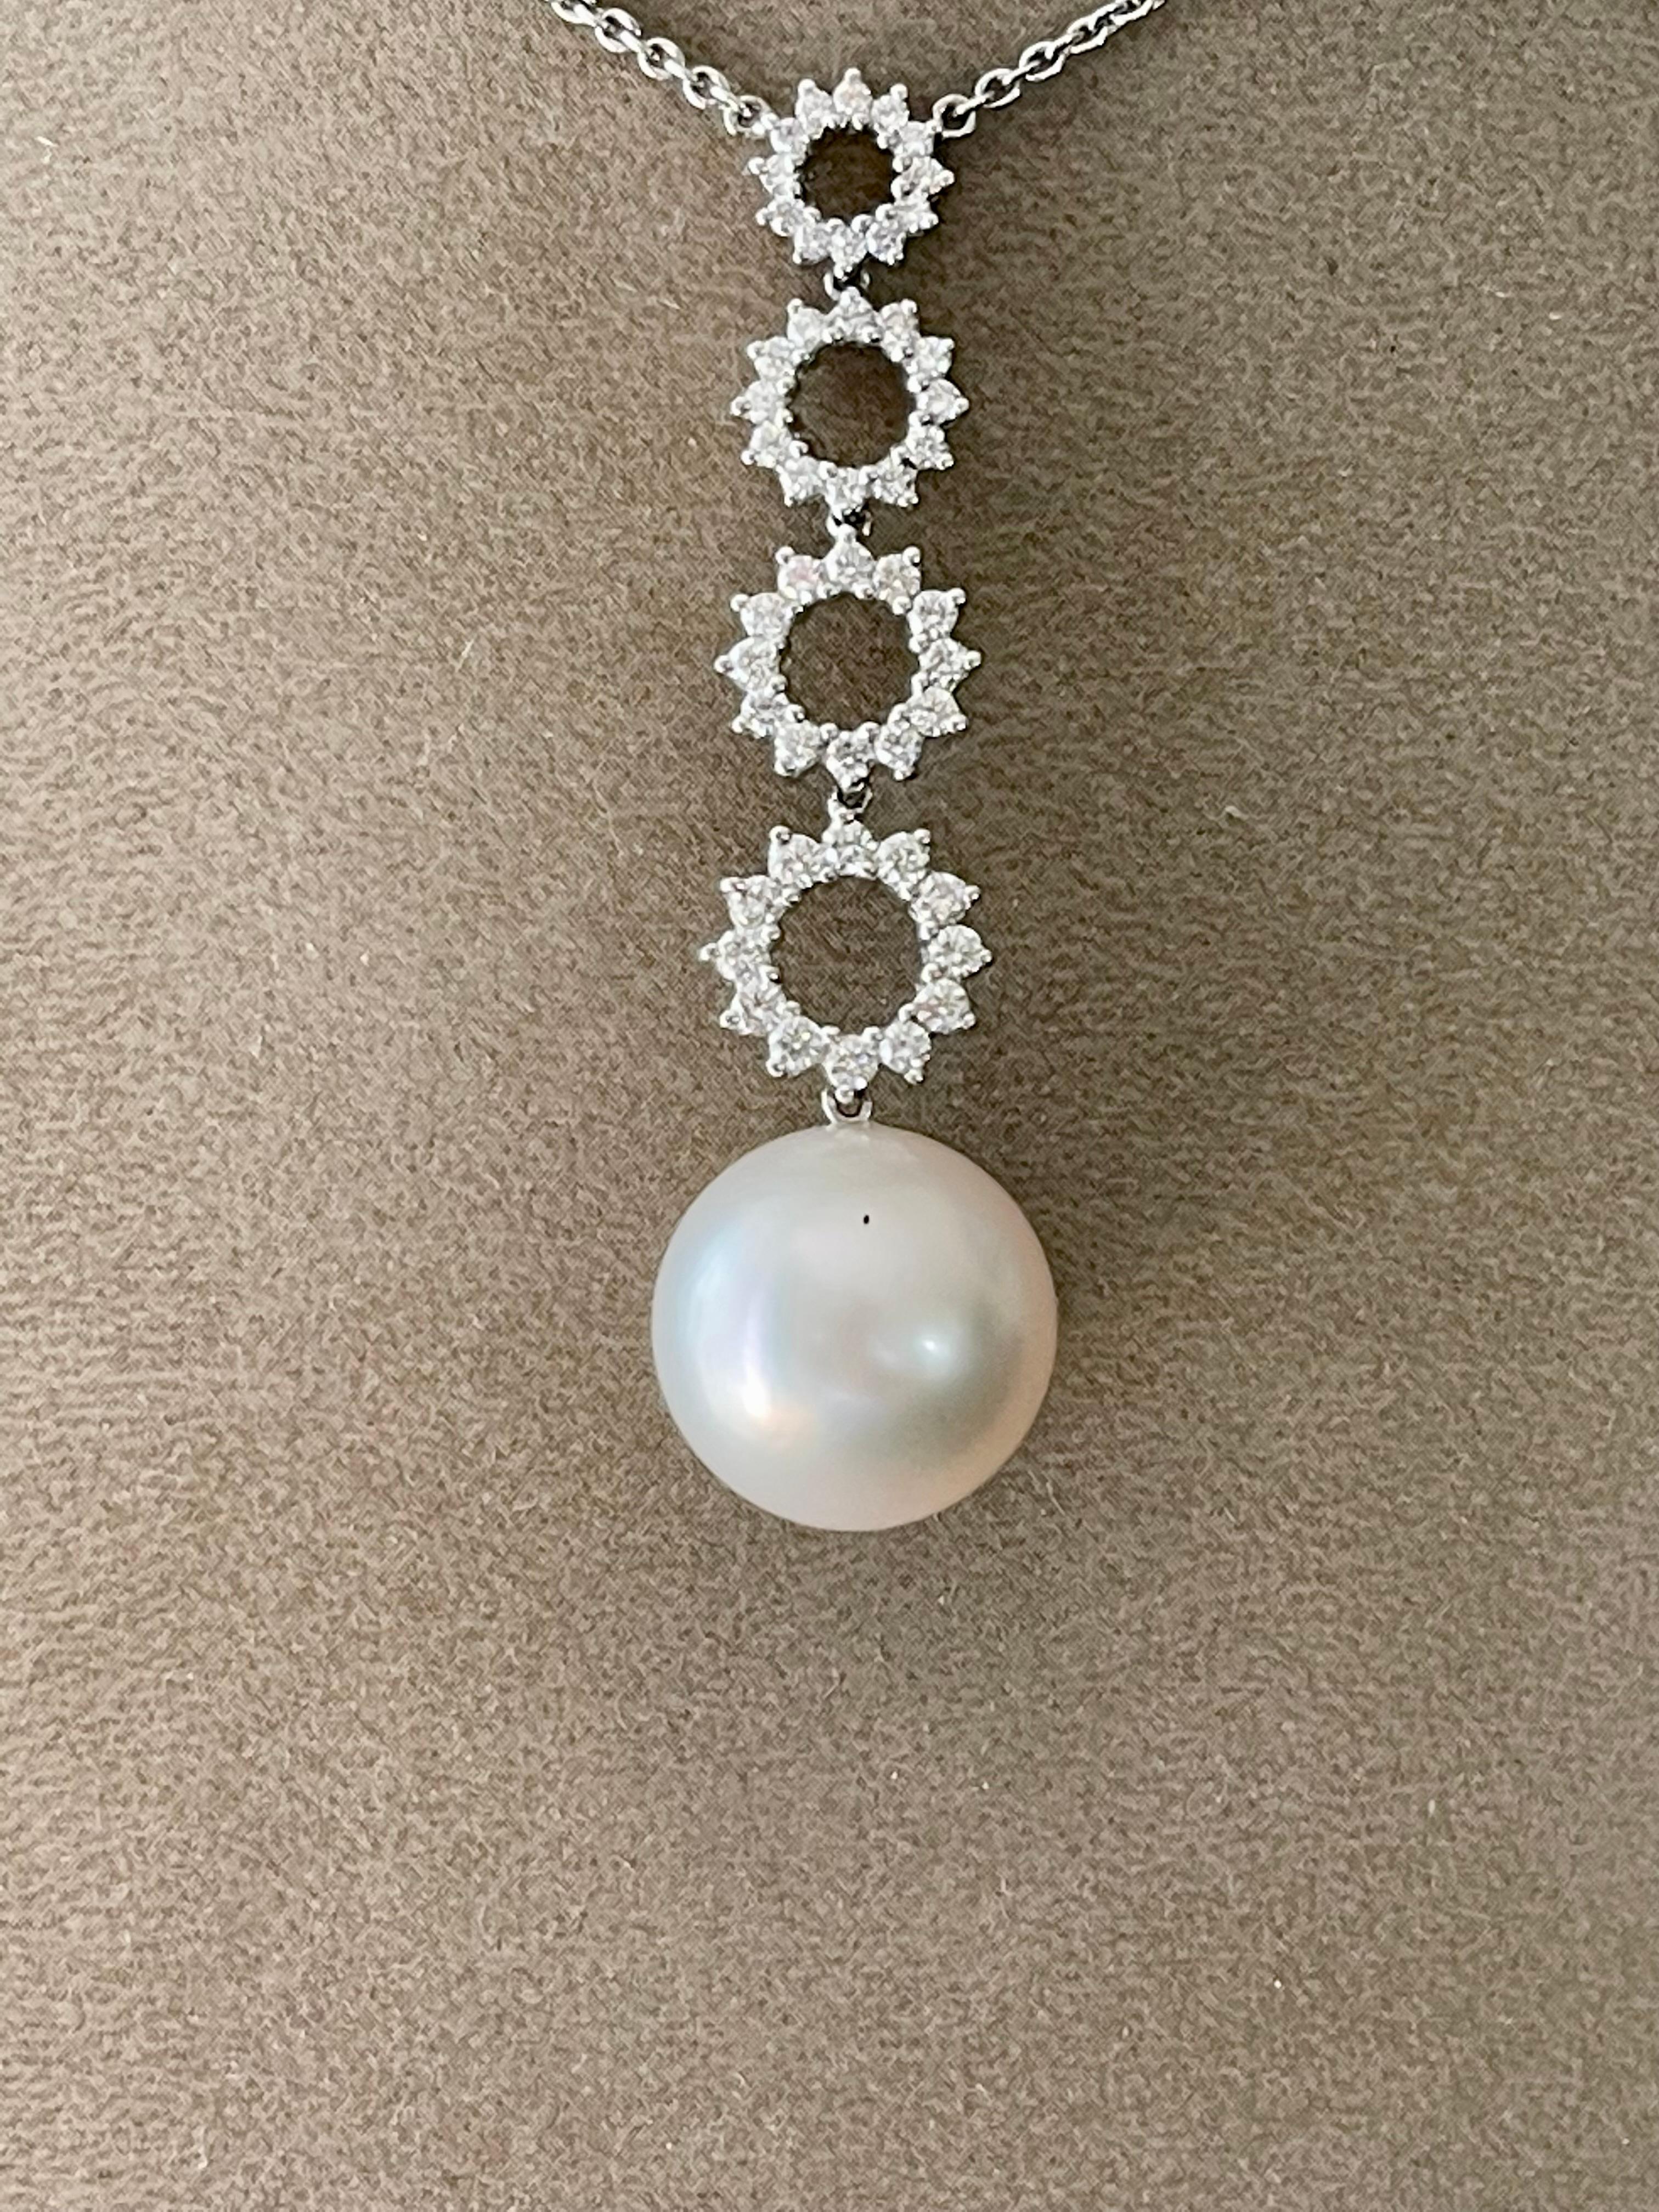 Timeless and attractive 18 K white Gold chain featuring a round white South Sea Pearl (14.4mm) and brilliant cut Diamonds with a total weight of 0.82ct. The total length of the white gold chain is 41 cm and the necklace can be worn with either